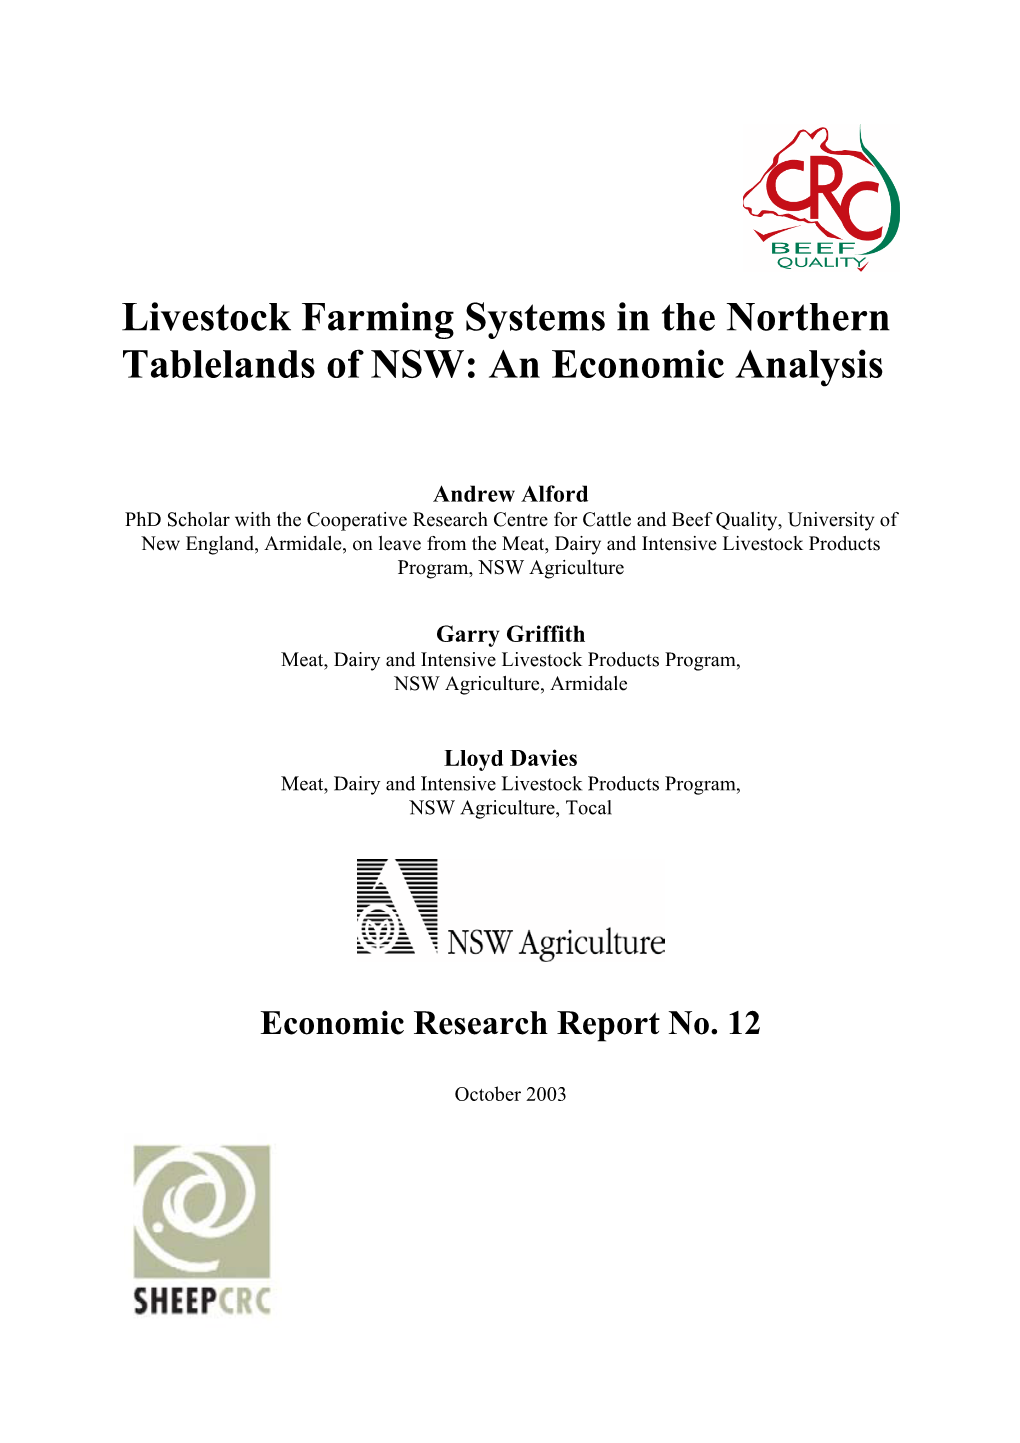 Livestock Farming Systems in the Northern Tablelands of NSW: an Economic Analysis